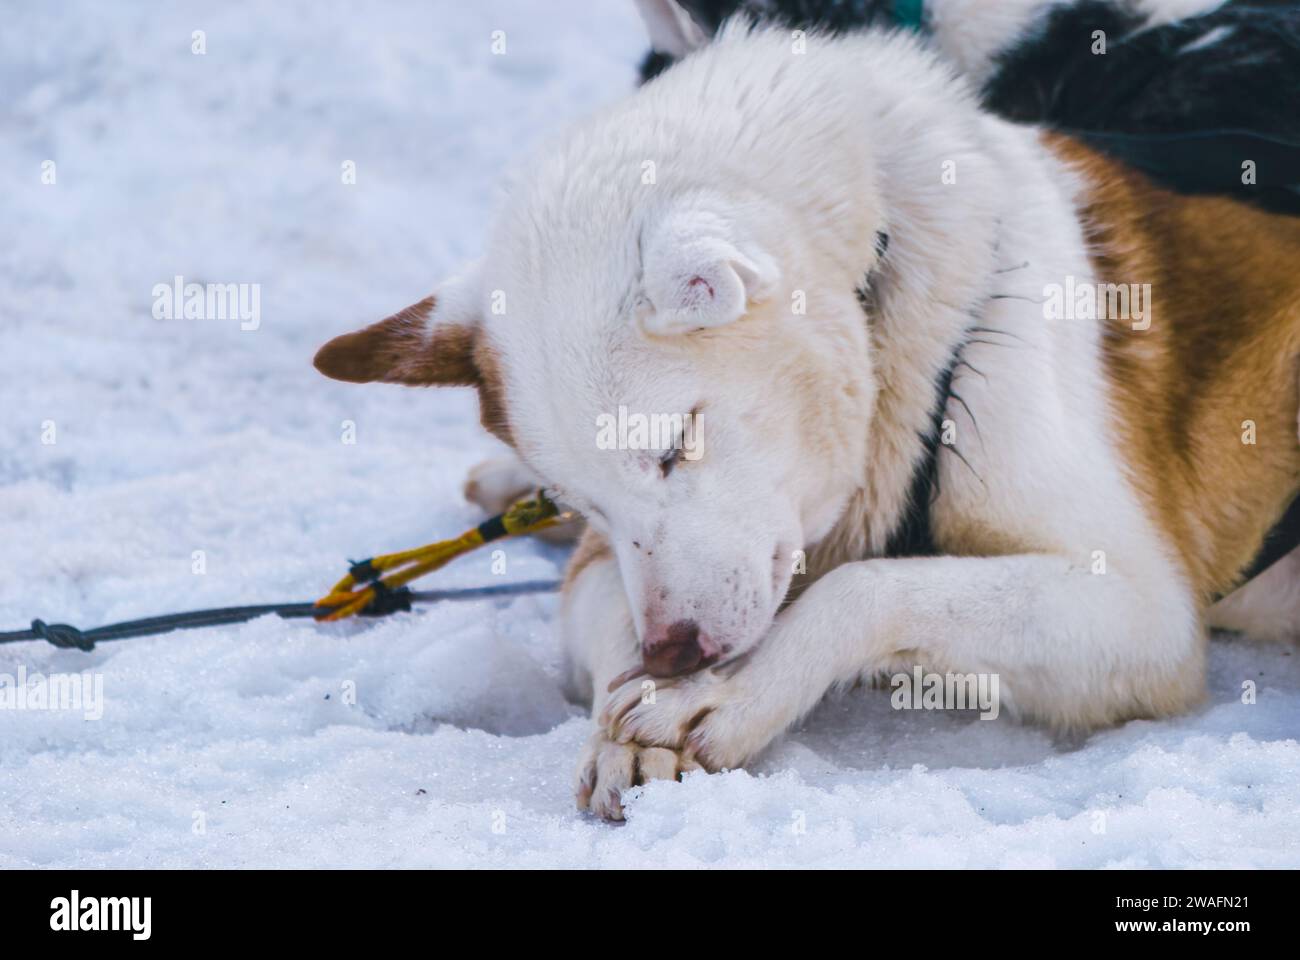 A cute dog sleeping in the snow Stock Photo